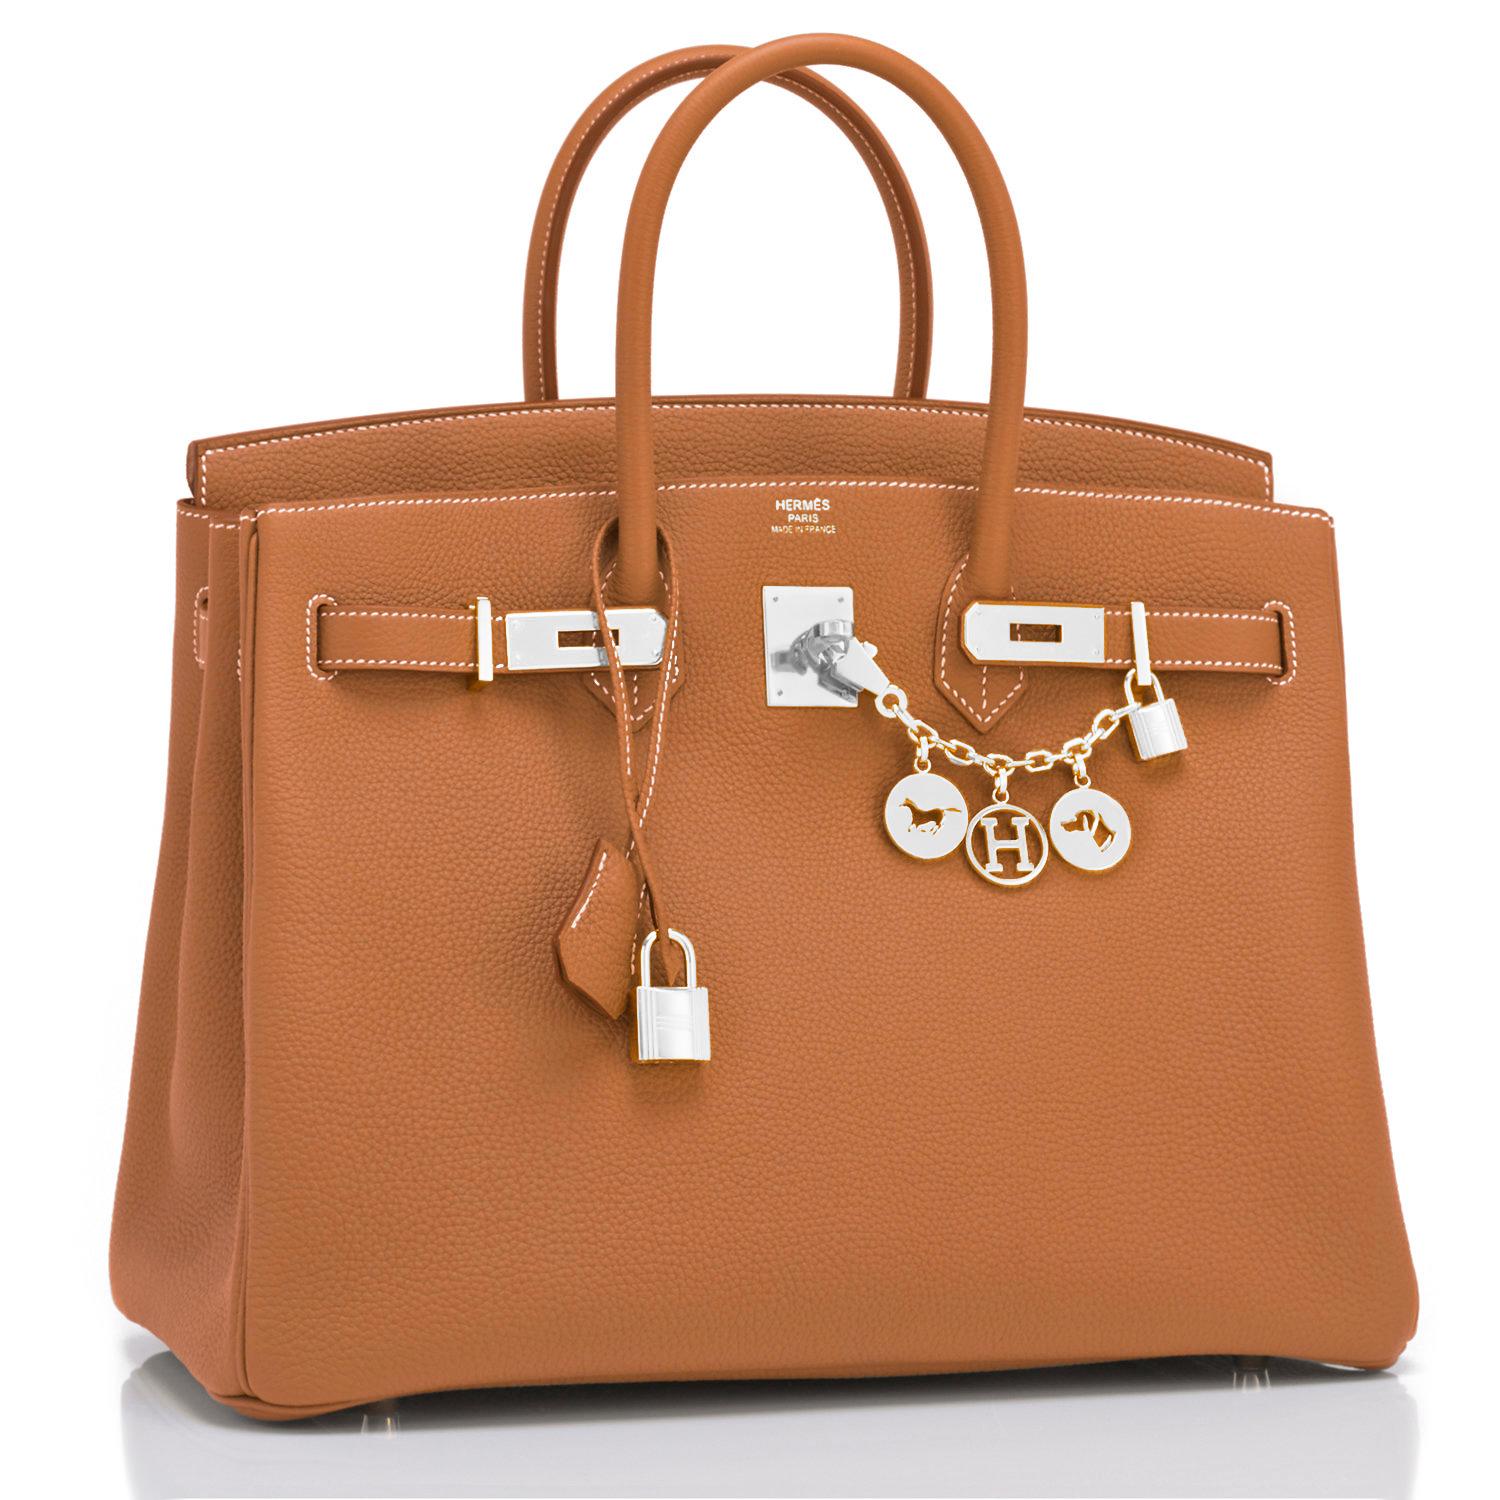 Hermes Gold Togo Camel Tan 35cm Birkin Palladium Hardware Z Stamp, 2021
Just purchased from Hermes store! Bag bears new 2021 interior Z Stamp.
Brand New in Box. Store Fresh. Pristine Condition (with plastic on hardware). 
Perfect gift! Comes with